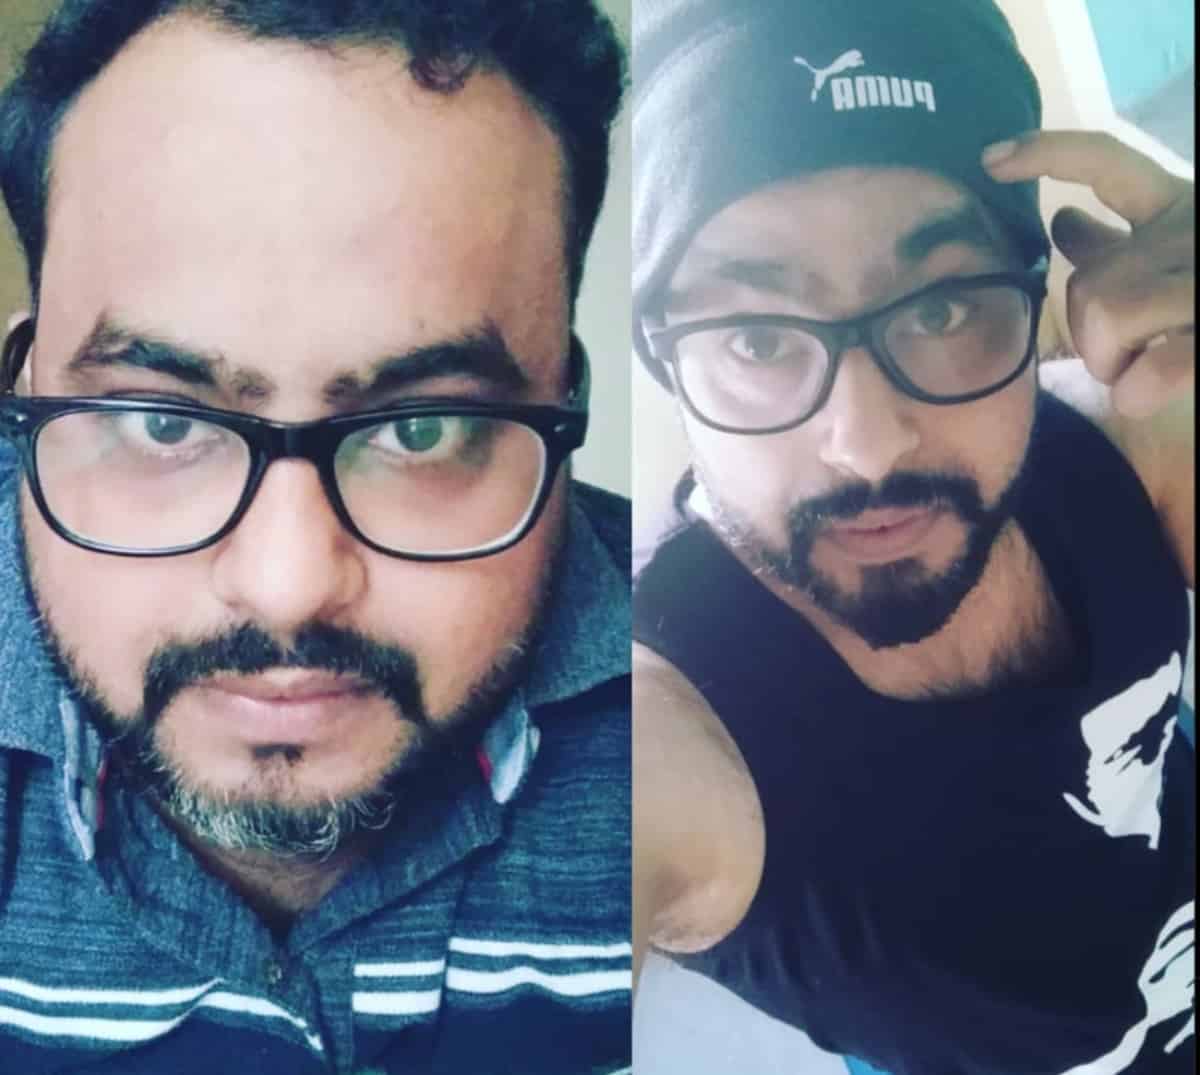 Anubhav head shot before and after weight loss transformation.